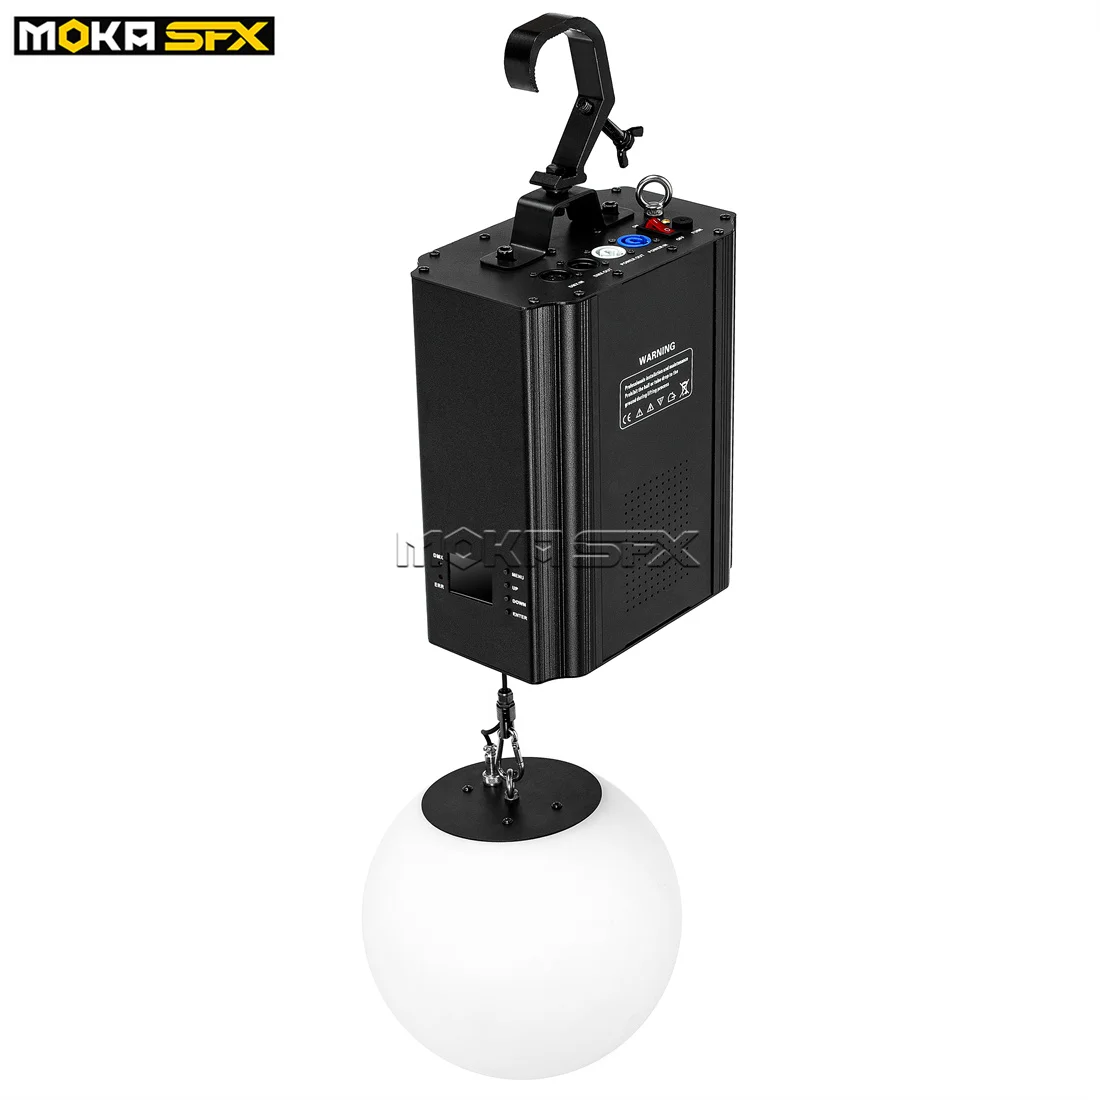 

MOKA SFX 3D Up Down Lifting System DMX RGB LED Lifting Ball Wave Effect Winch Colorful Kinetic Stage Light Ball For DJ Disco